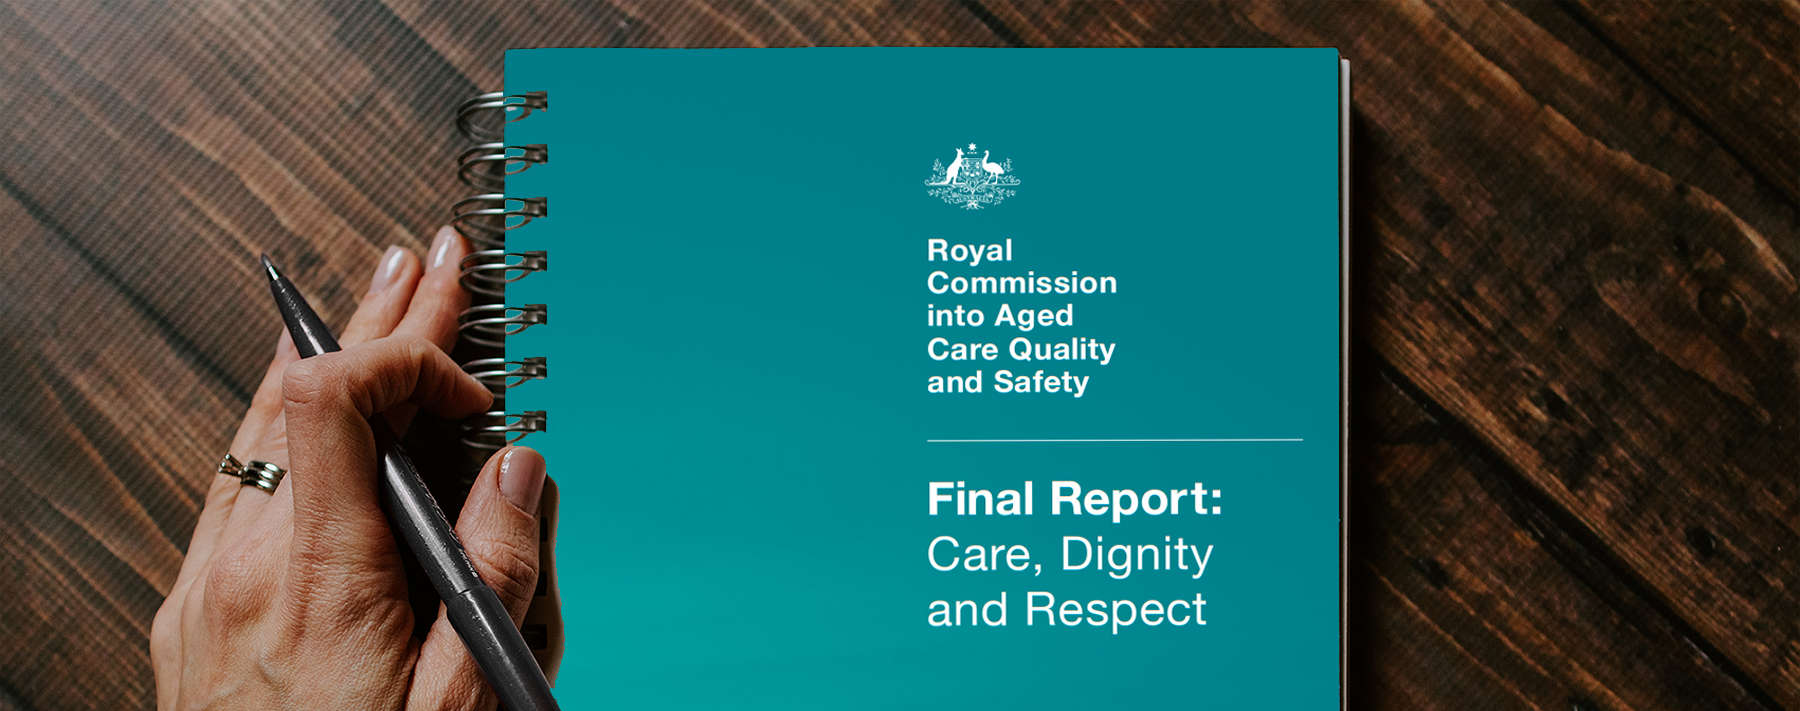 Royal Commission Series: new governance standard